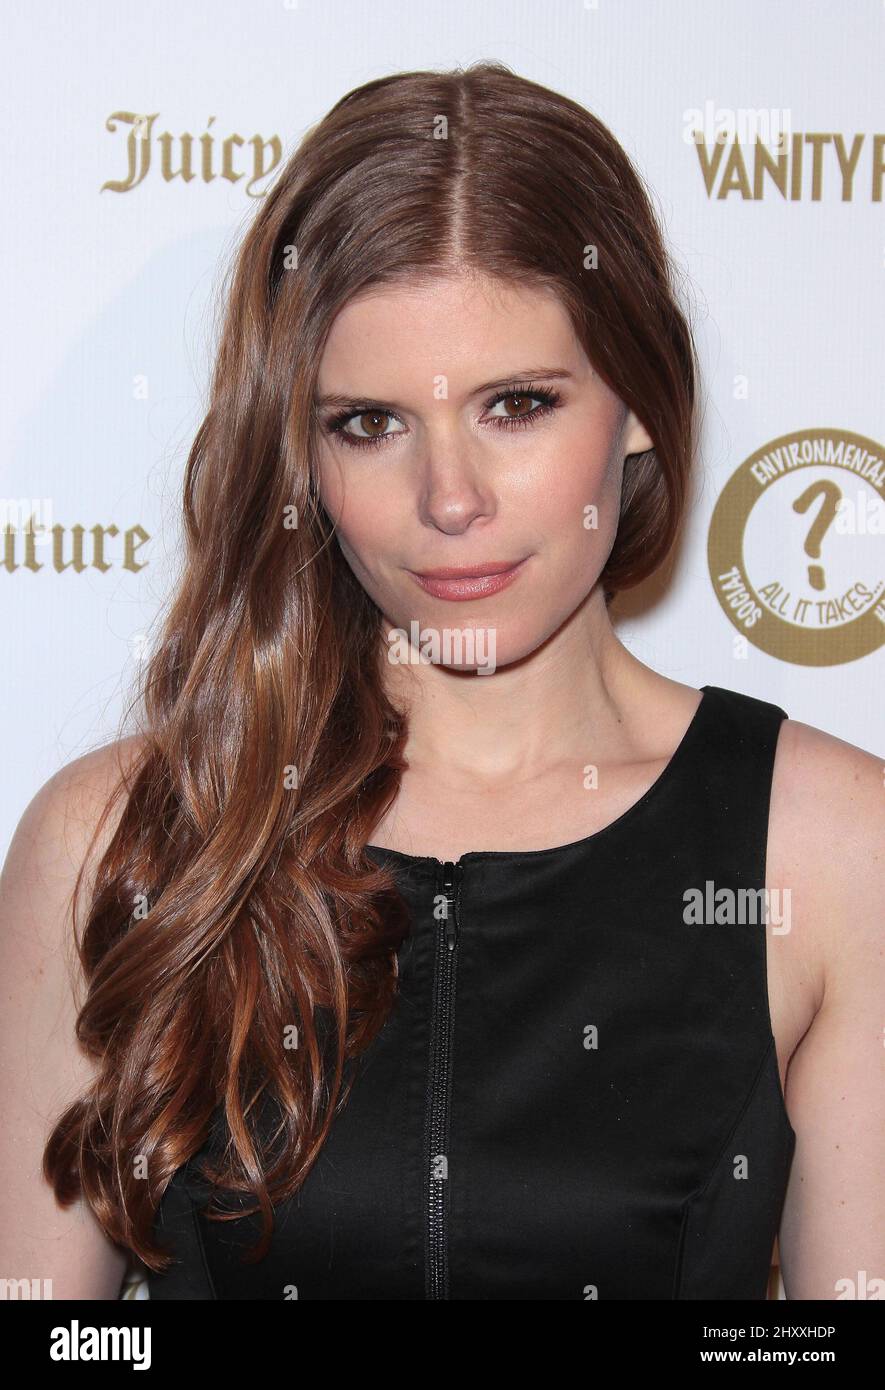 Kate Mara during Vanity Fair And Juicy Couture's 'Vanities' 20th Anniversary Party Supporting All It Takes held at Siren Studios, Hollywood, California Stock Photo